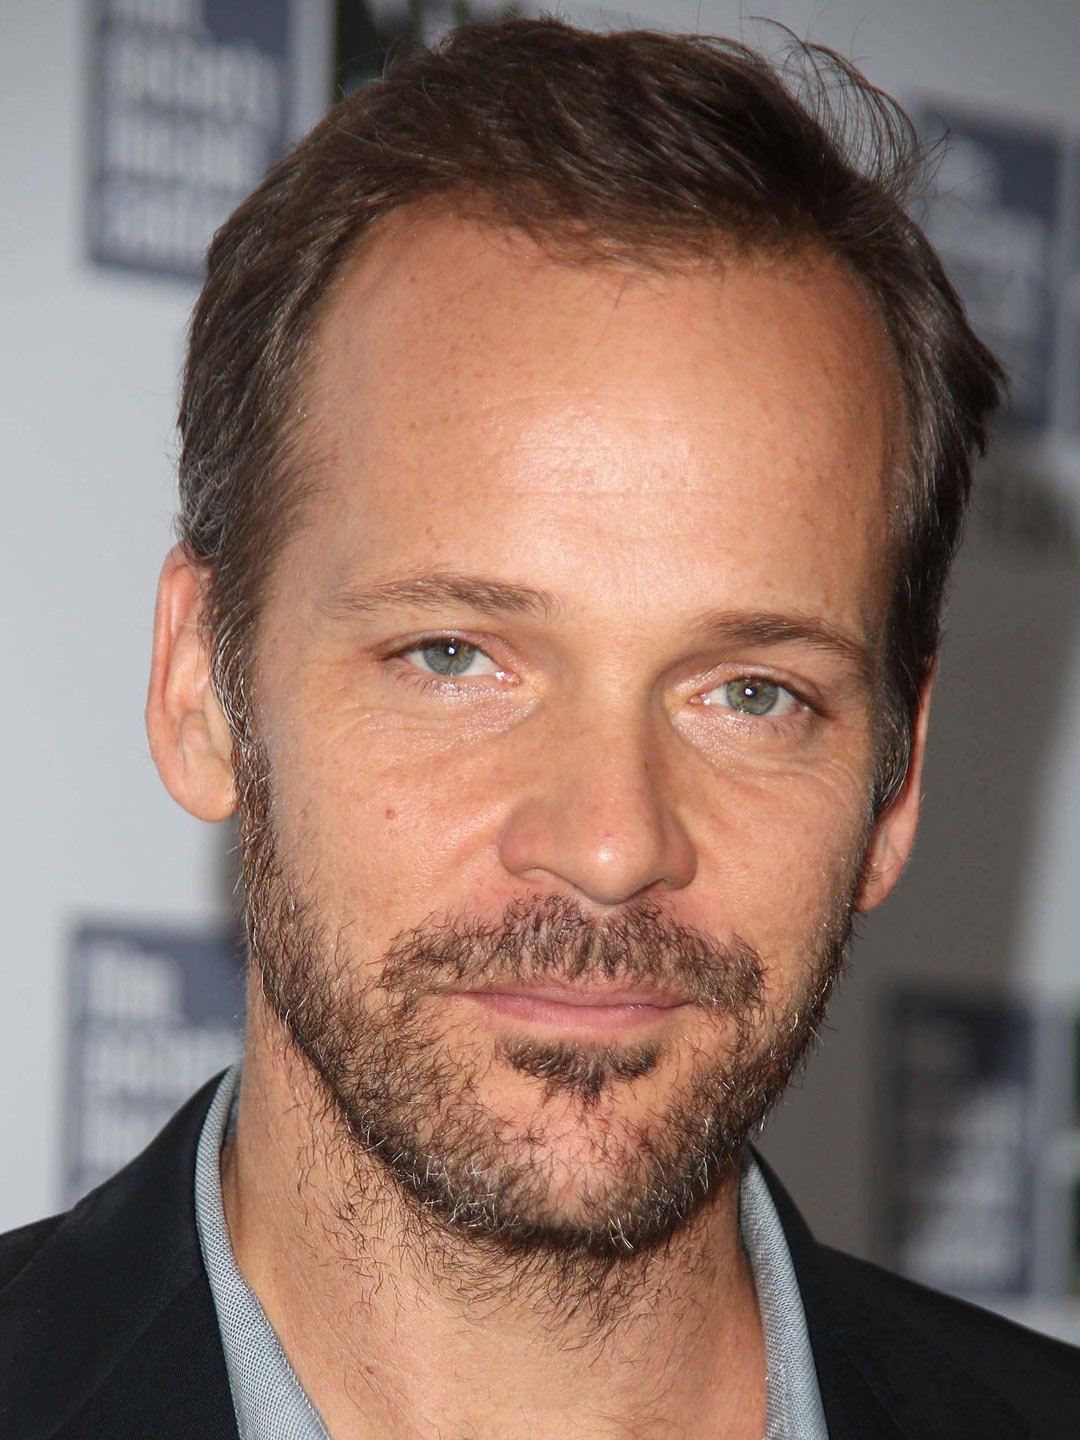 How tall is Peter Sarsgaard?